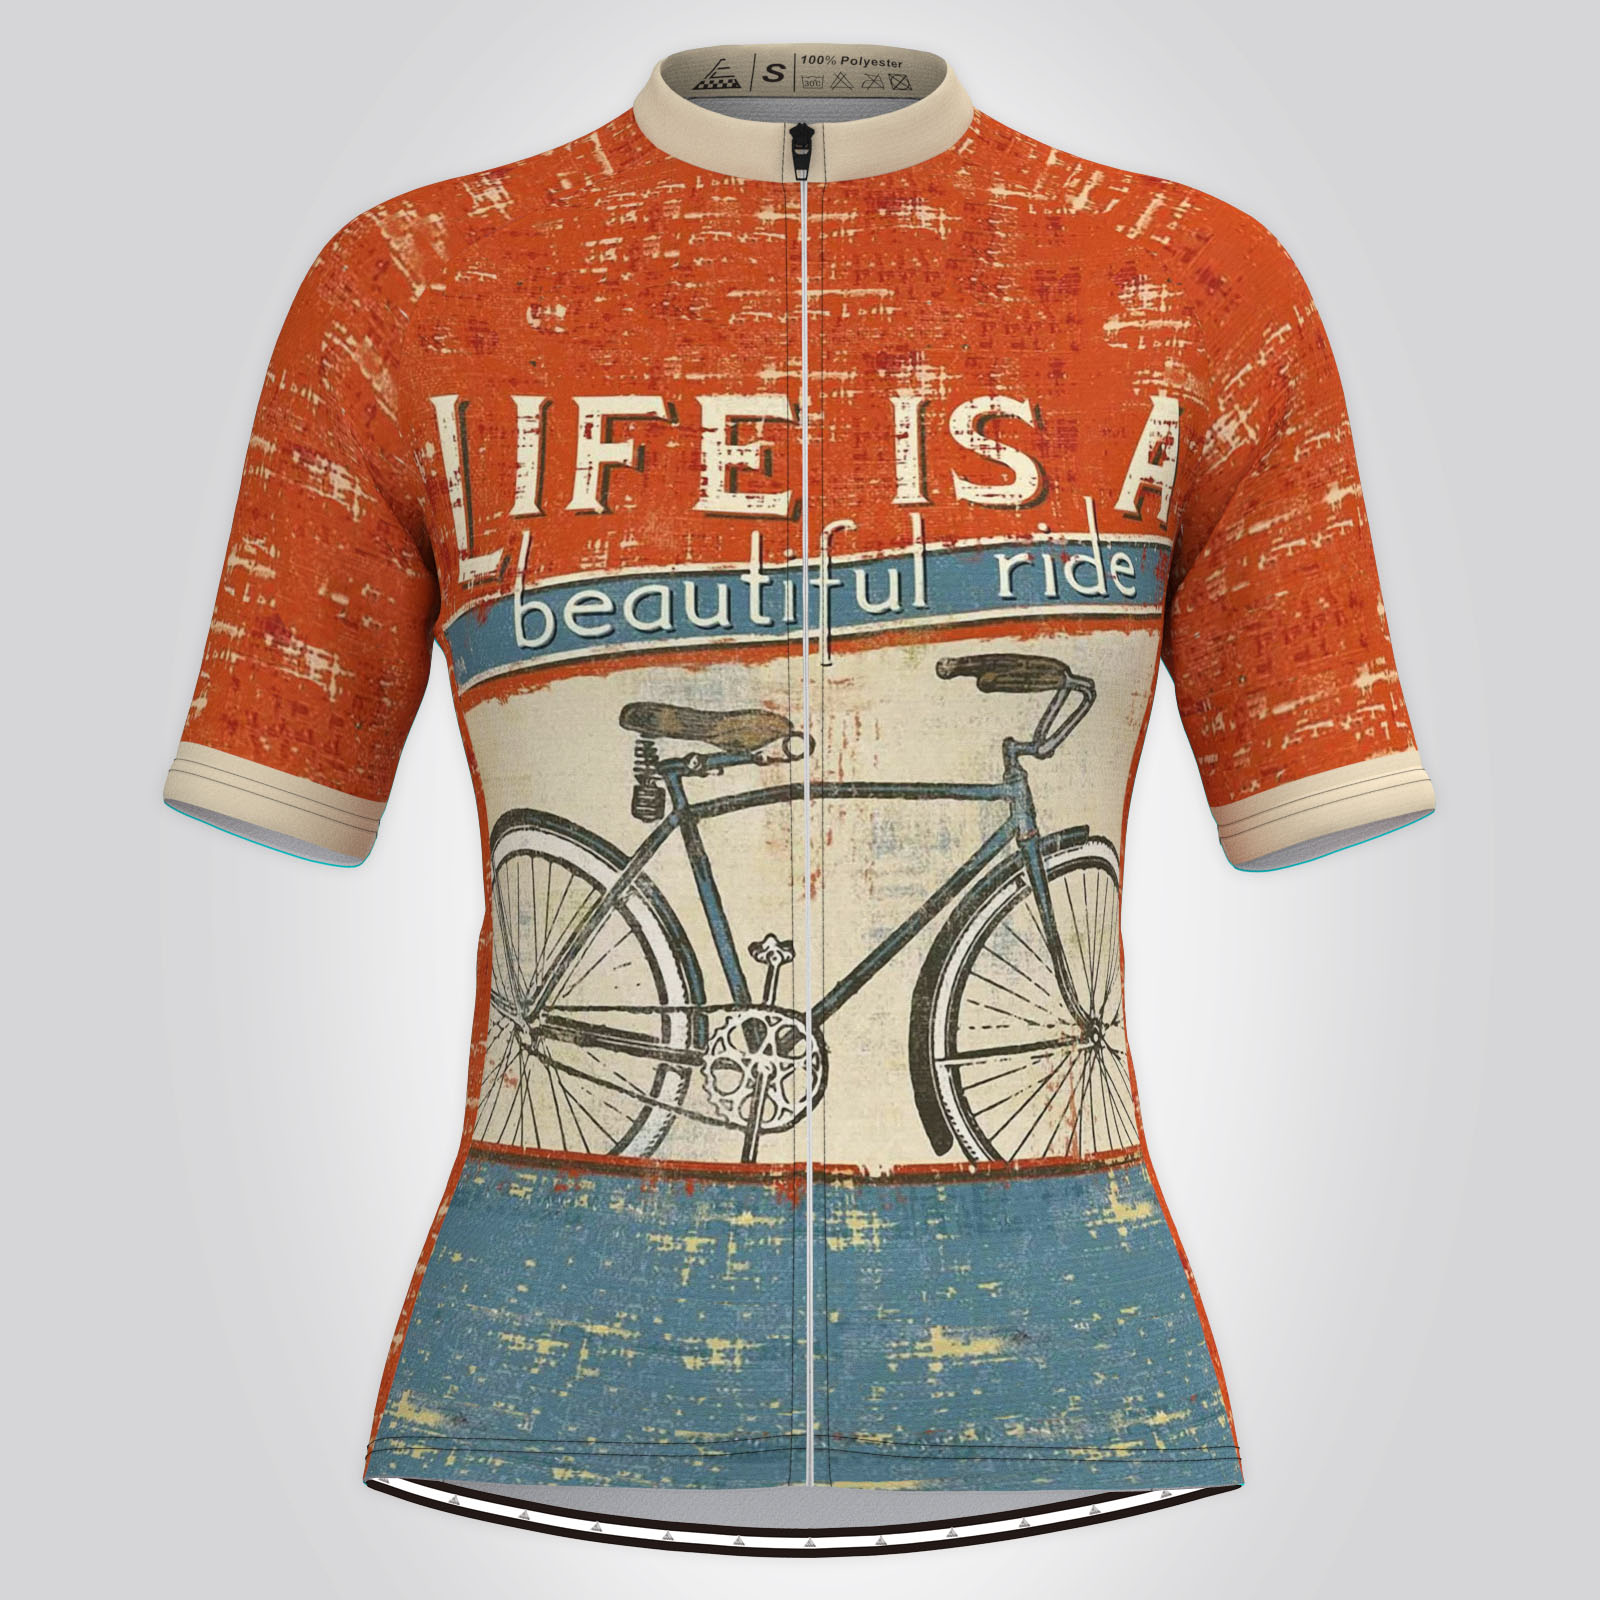 Making A Cycling Jersey: What You Get At Every Price